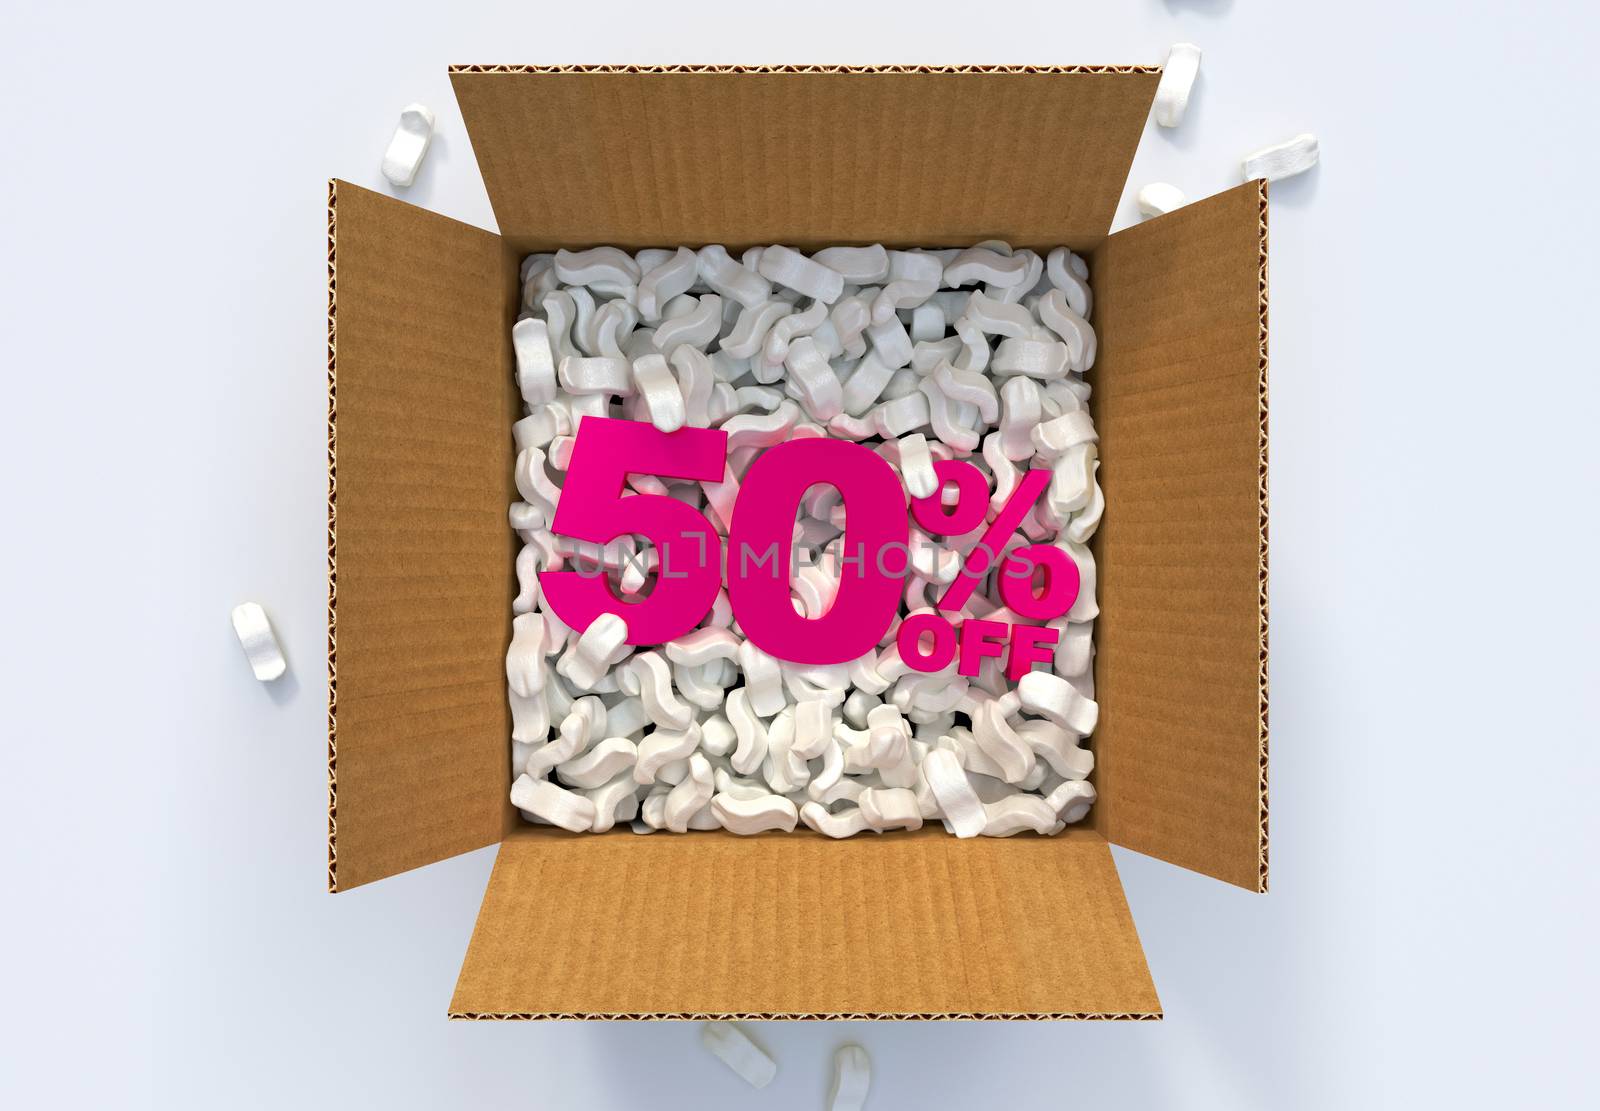 Cardboard Box with shipping peanuts and 50 percent off sign